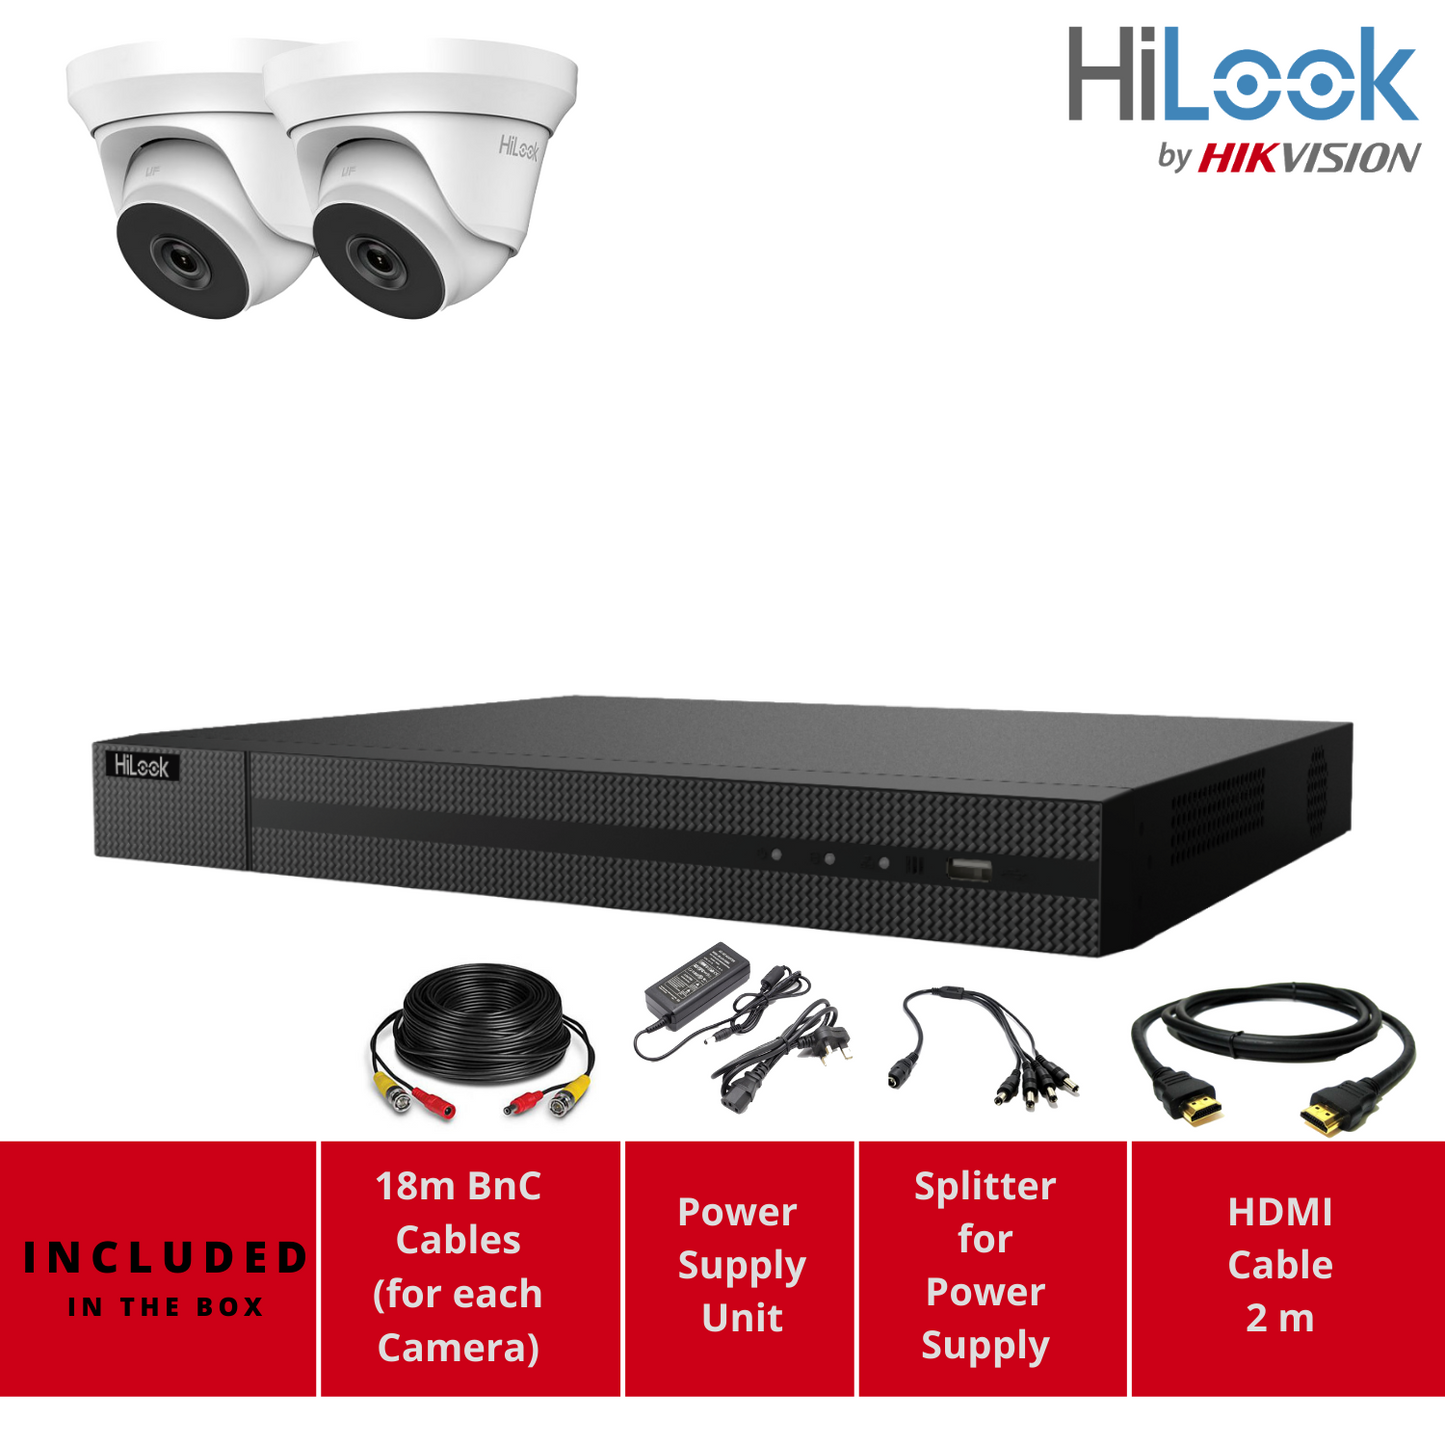 HIKVISION HD CCTV SYSTEM 2MP 4CH DVR OUTDOOR IP66 40M LOW LIGHT CAMERA 2x Cameras (white) 2TB HDD